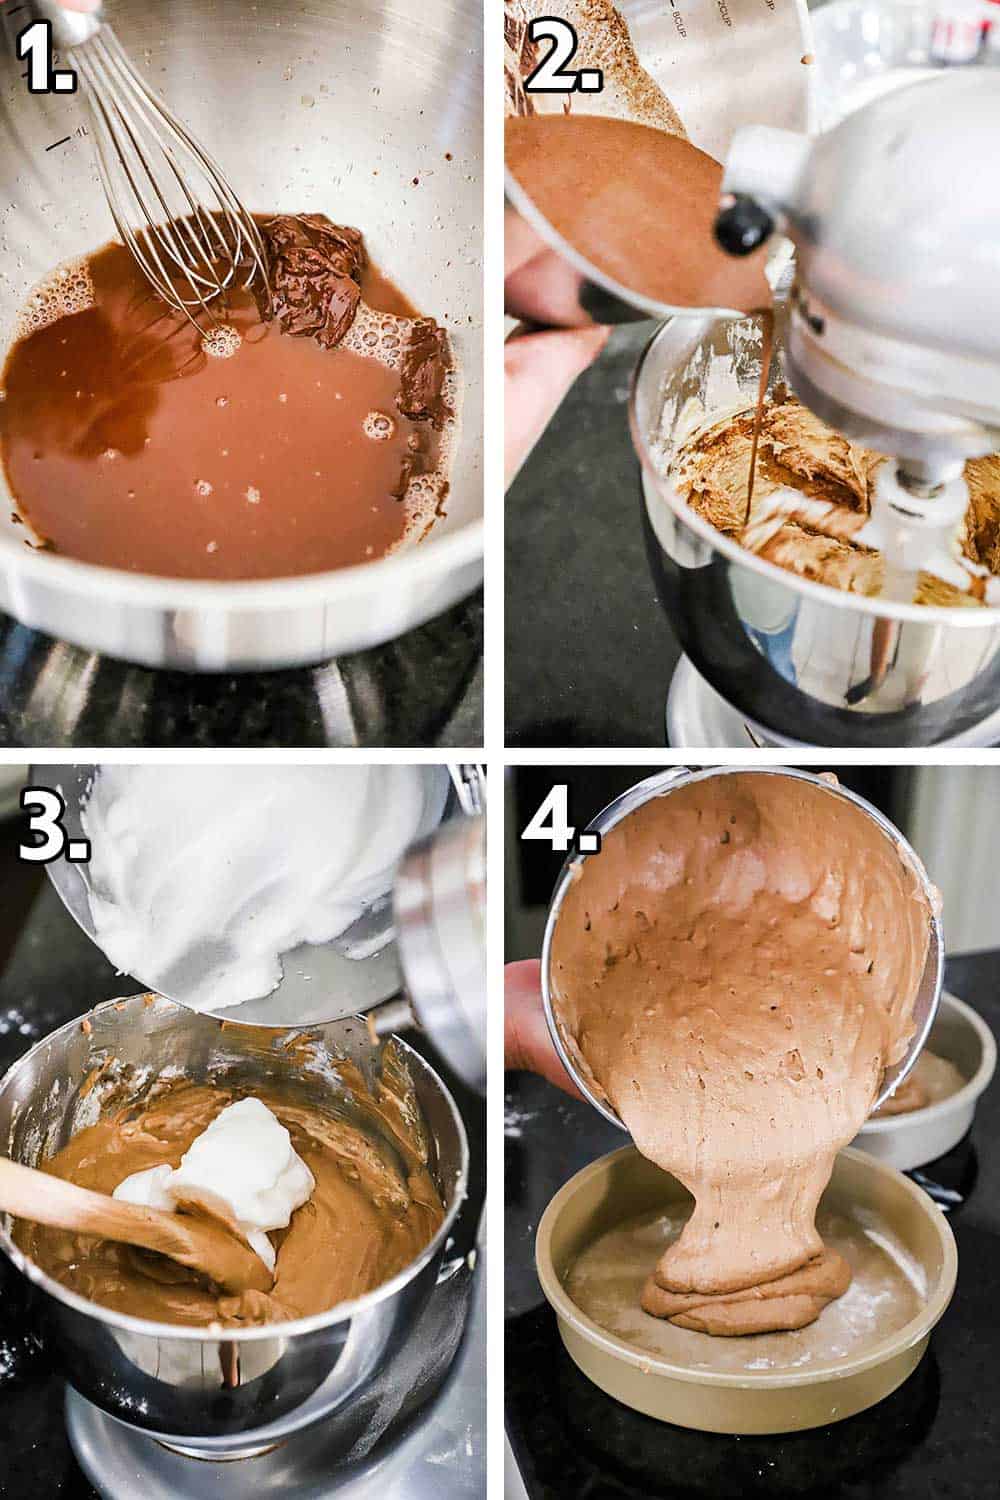 Chocolate melting in a metal bowl, and then it being poured into a mixer with cake batter, and then egg white peaks being folded in, and then batter pouring into cake pan. 